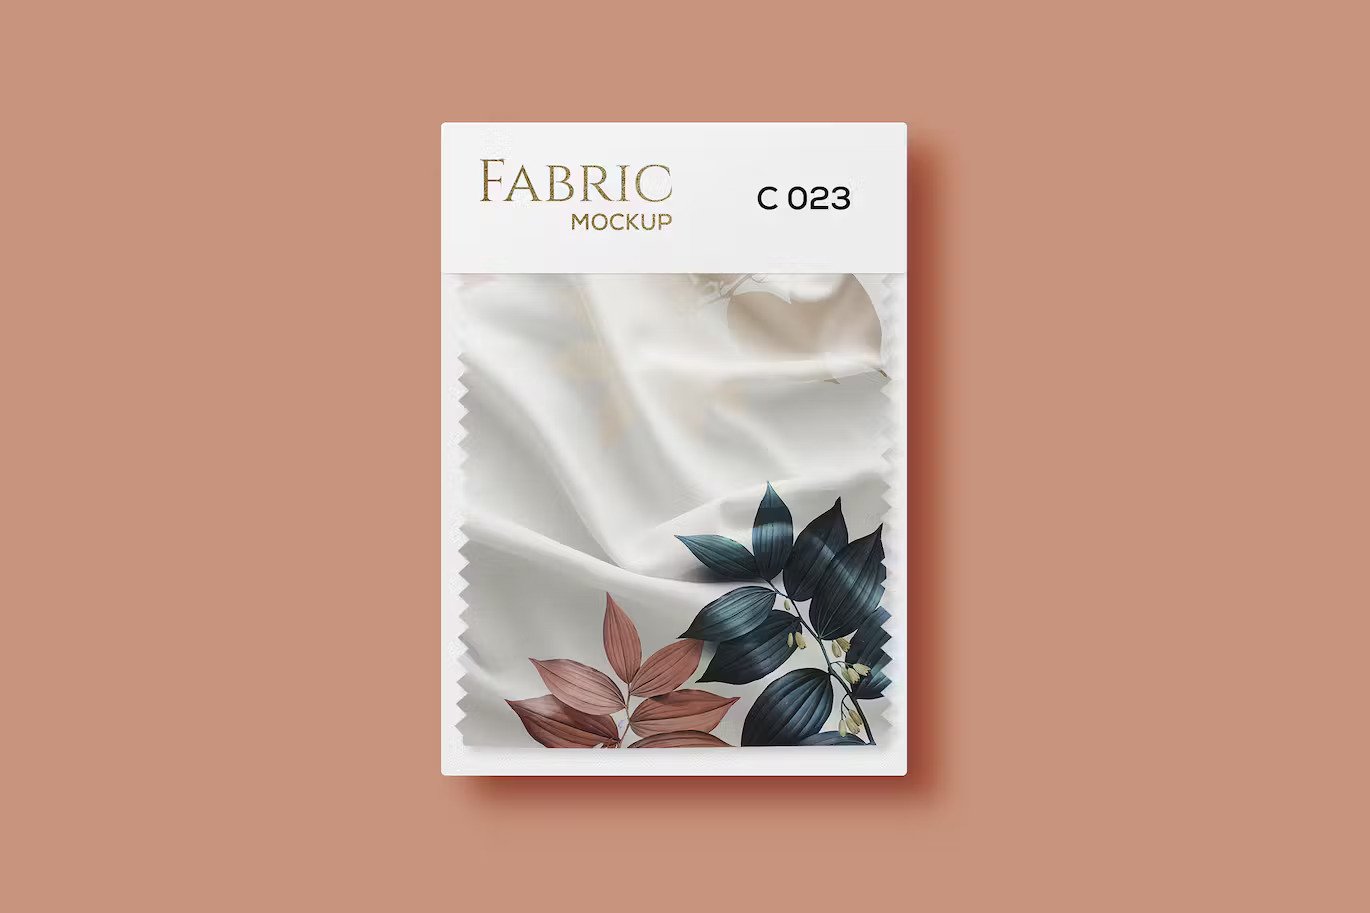 A fabric swatches mockup template